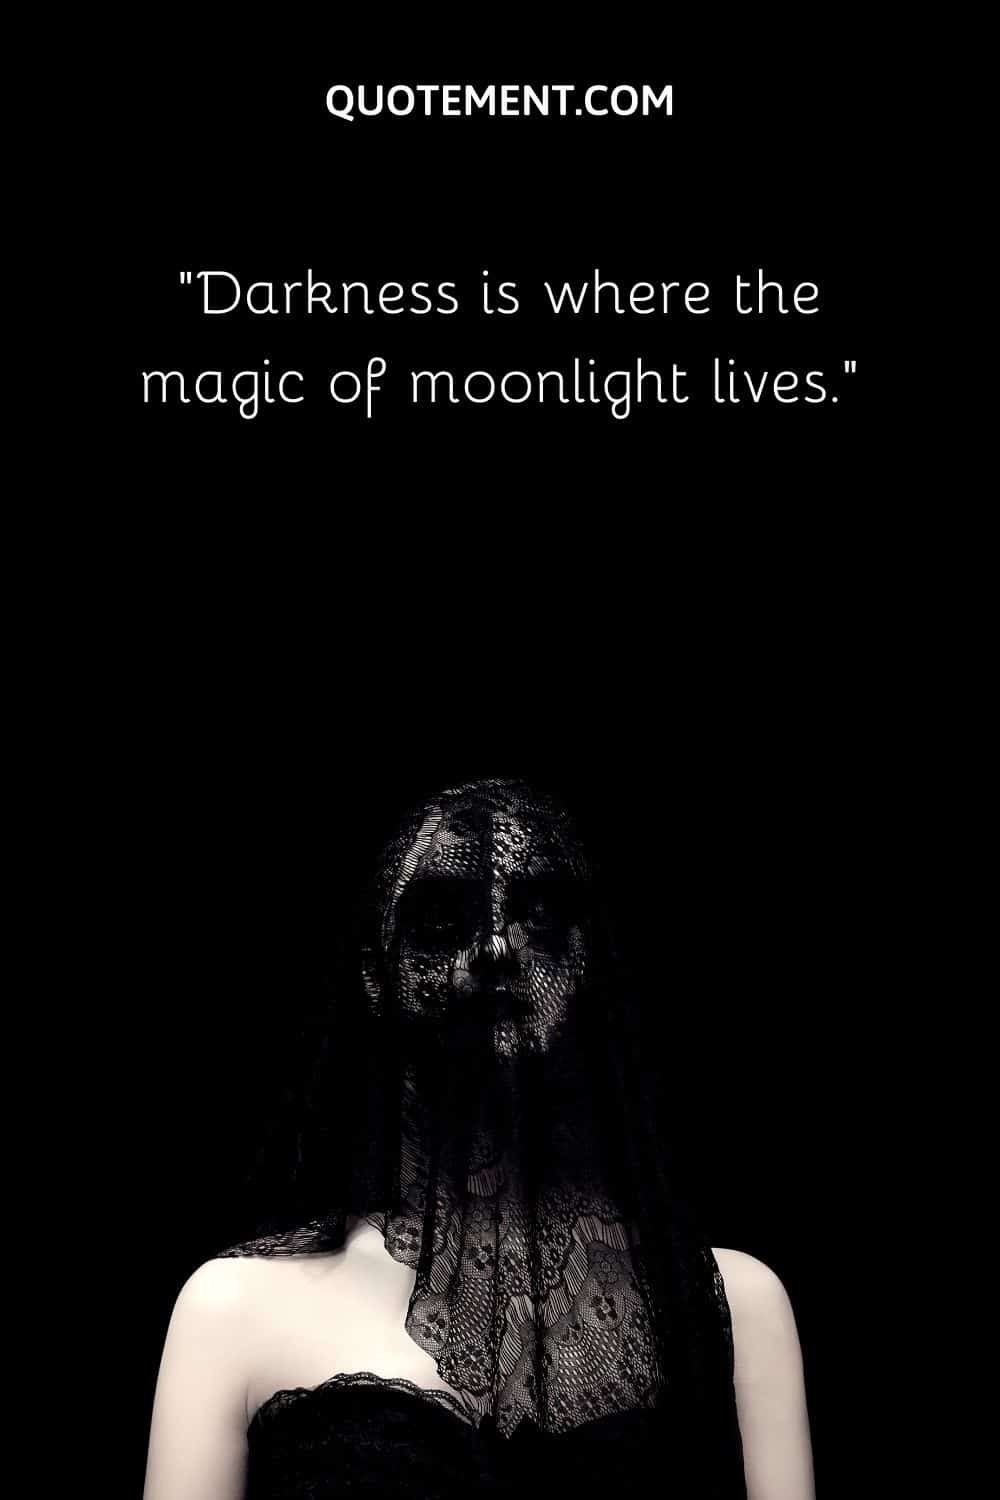 Darkness is where the magic of moonlight lives